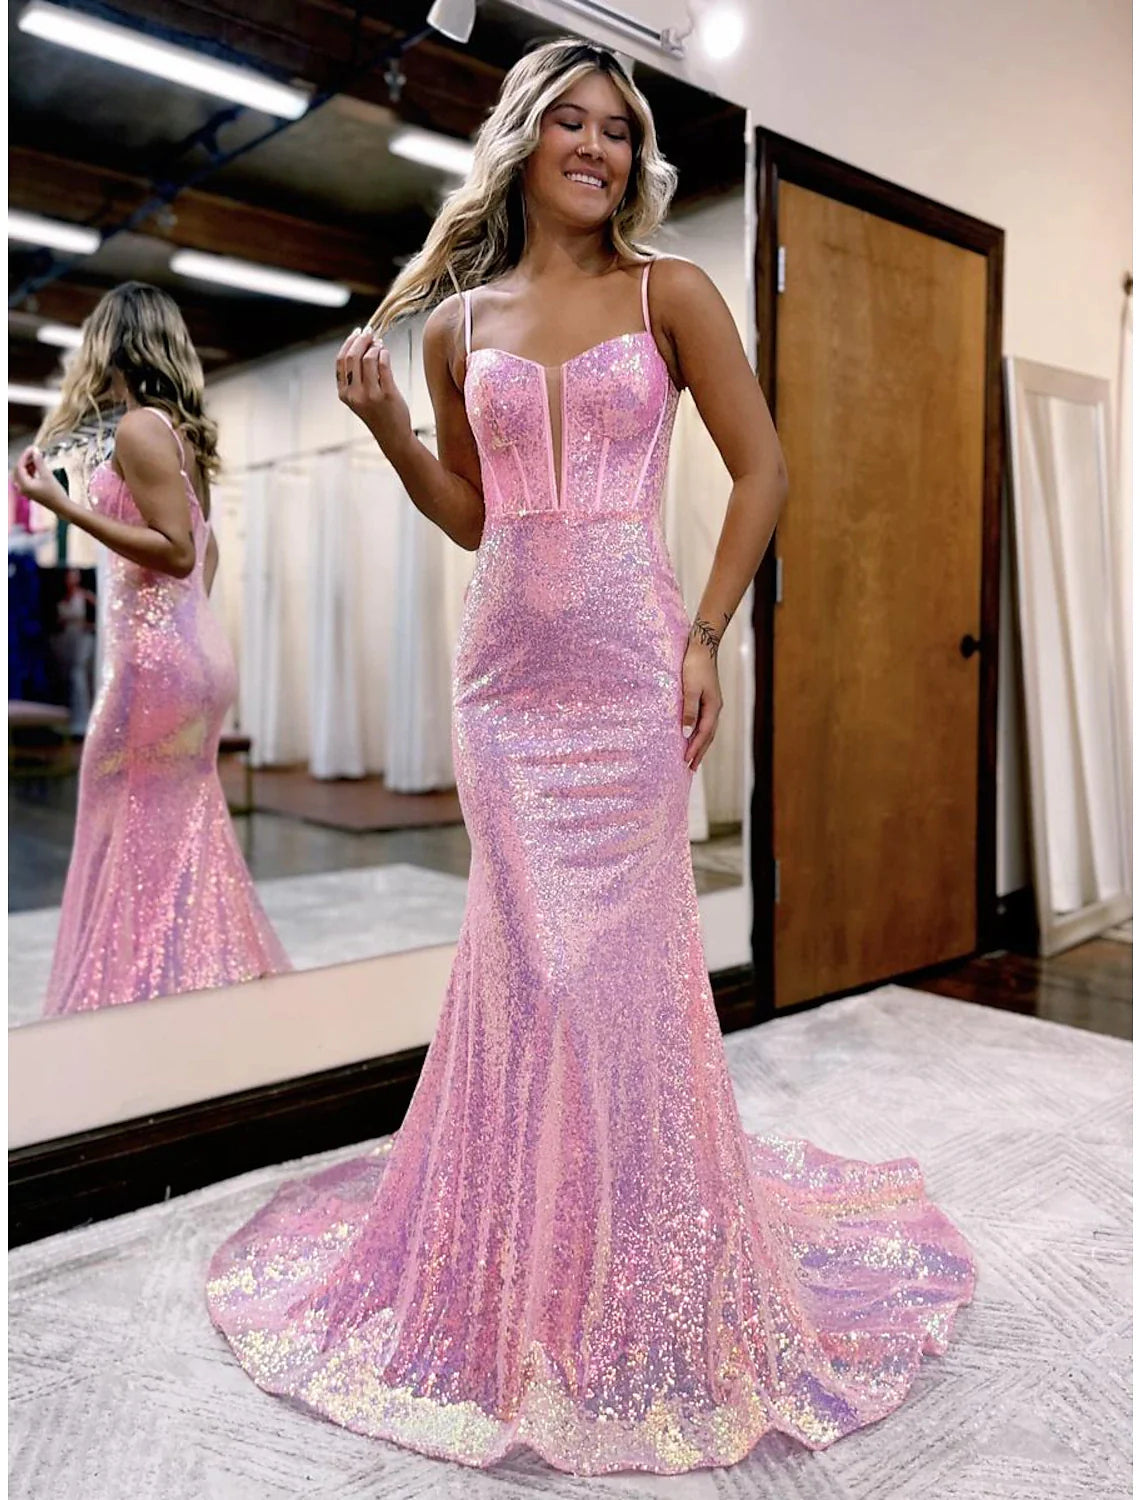 Mermaid / Trumpet Prom Dresses Sparkle & Shine Dress Formal Court Train Sleeveless Spaghetti Strap Sequined V Back with Sequin